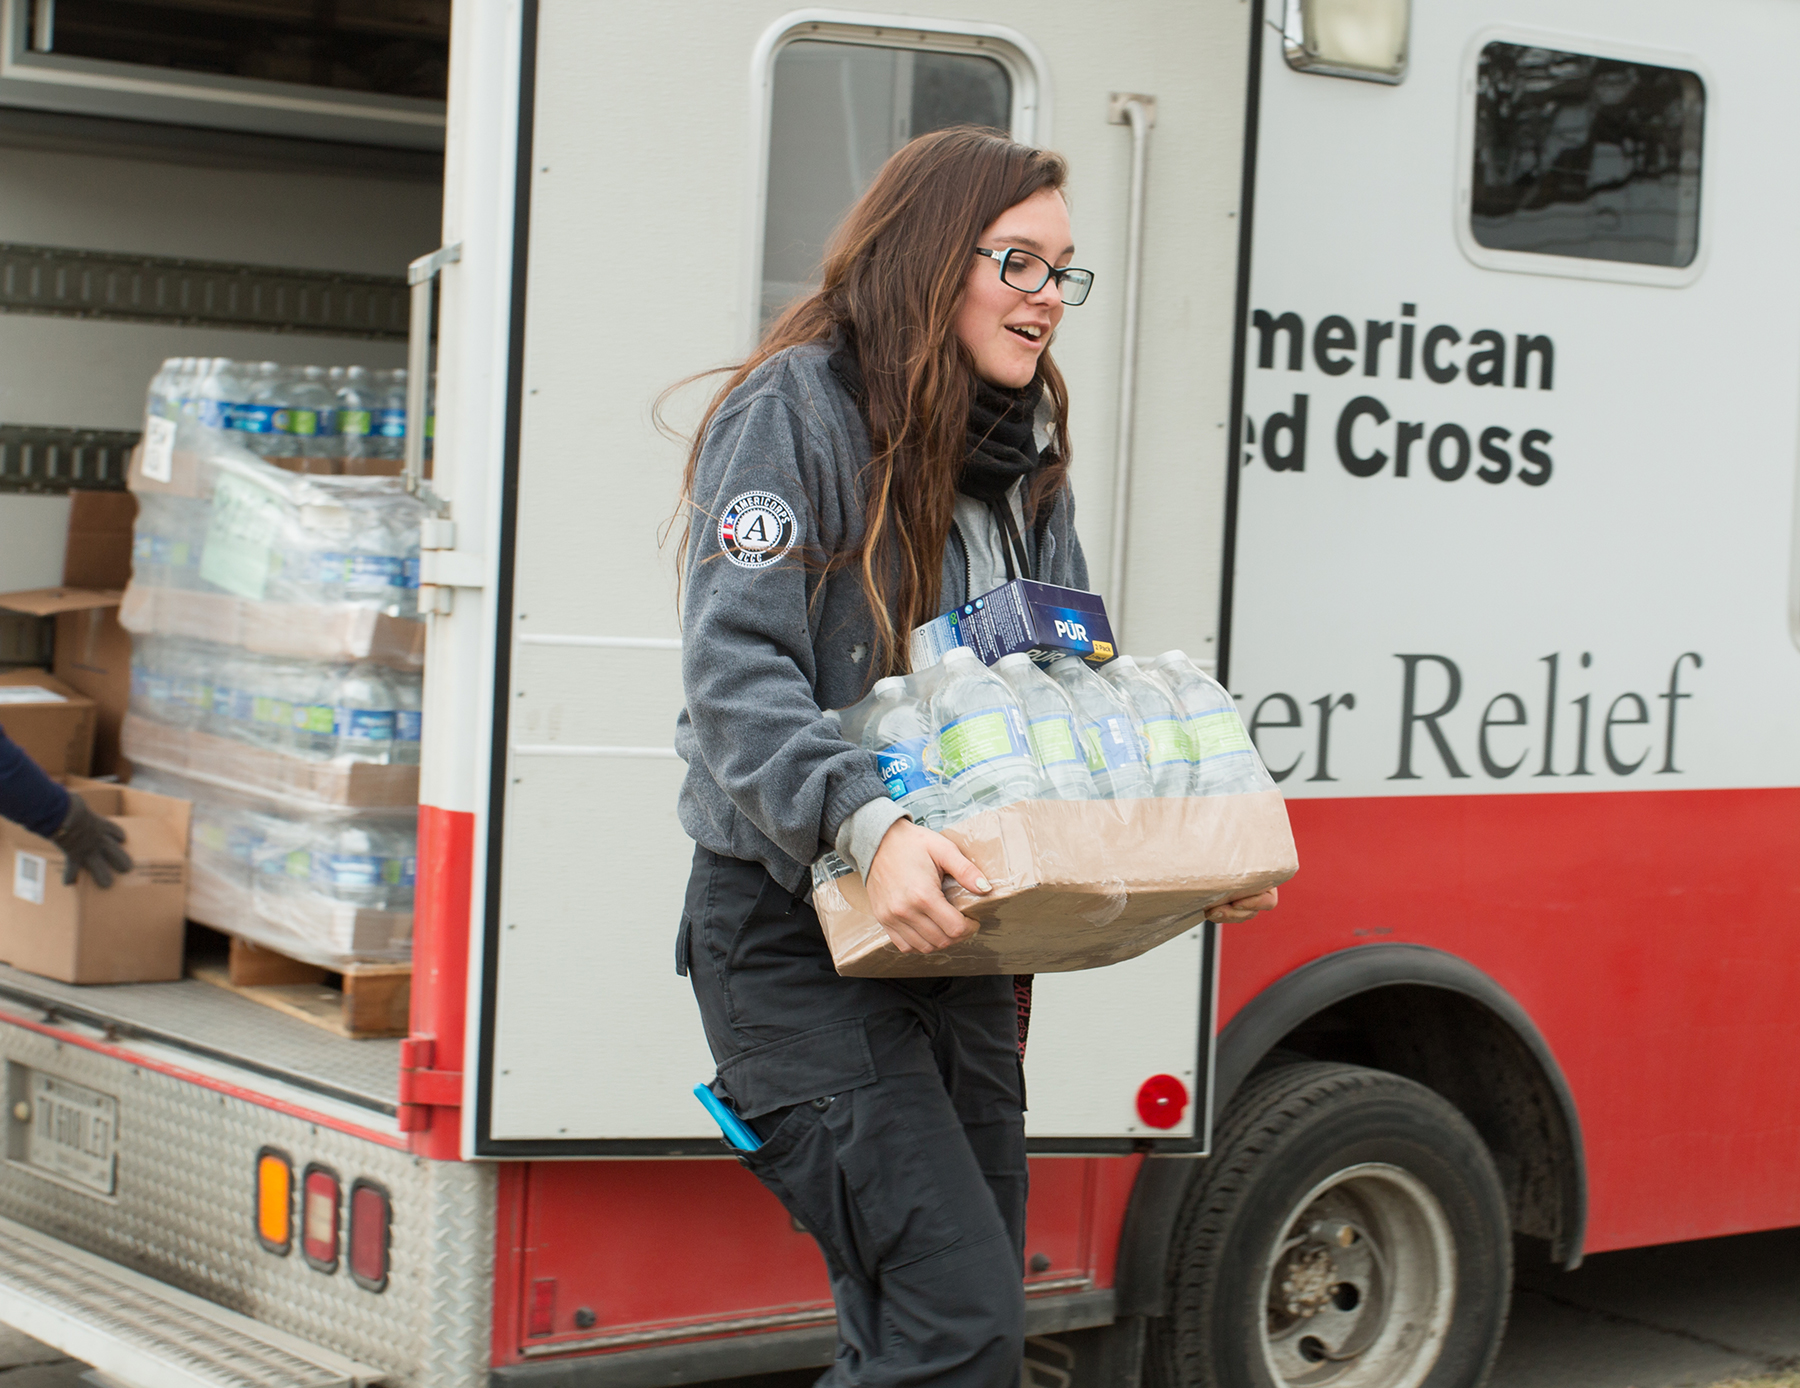 AmeriCorps Memebers and Red Cross volunteers working to help Flint citizens during the water crisis.